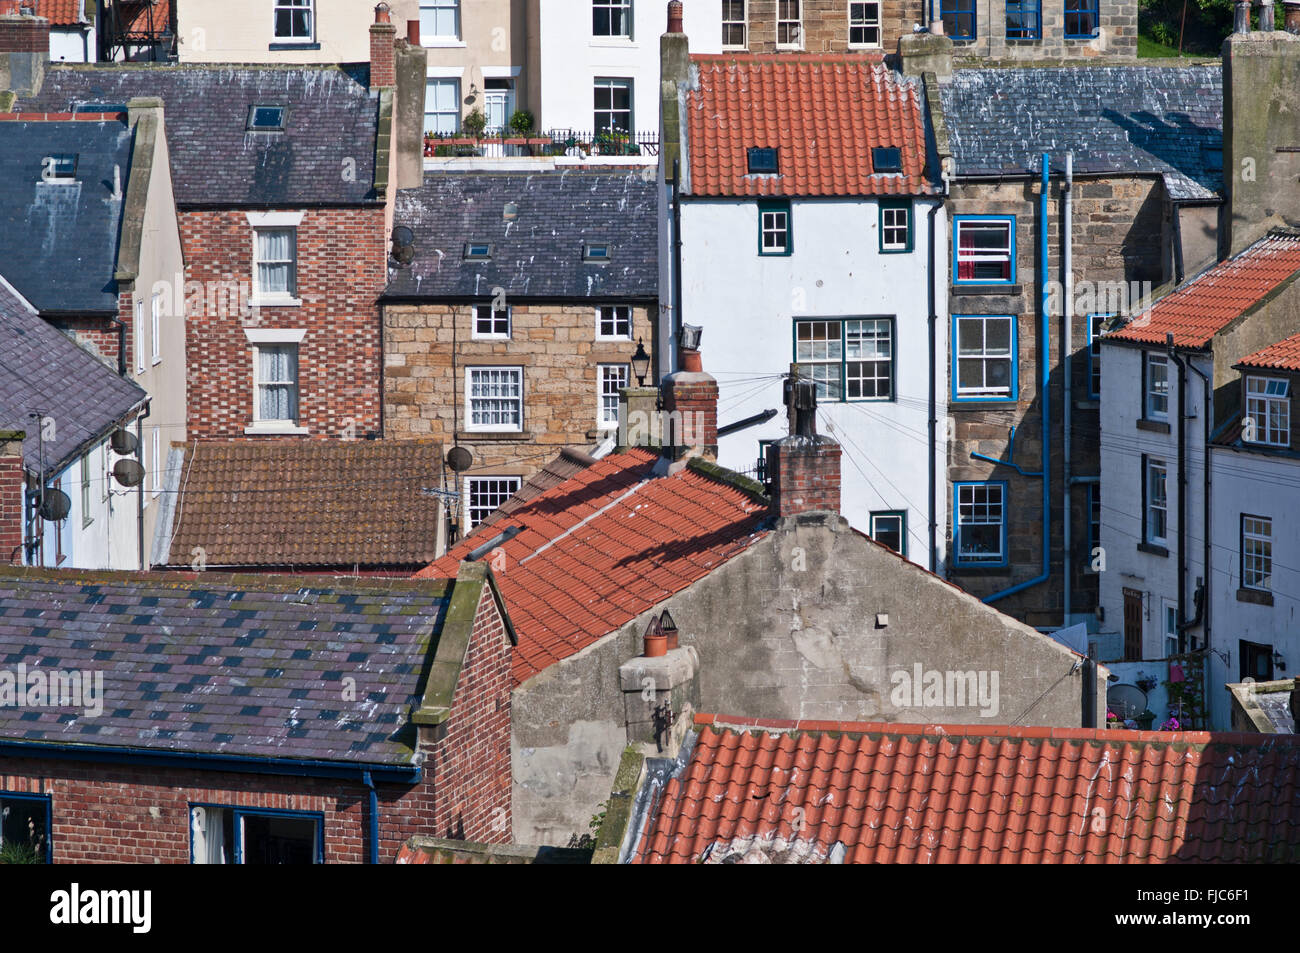 Close-up view of stone built terraces with grey slate and red pantiled roofs built on the hillside in Staithes, North Yorkshire Stock Photo